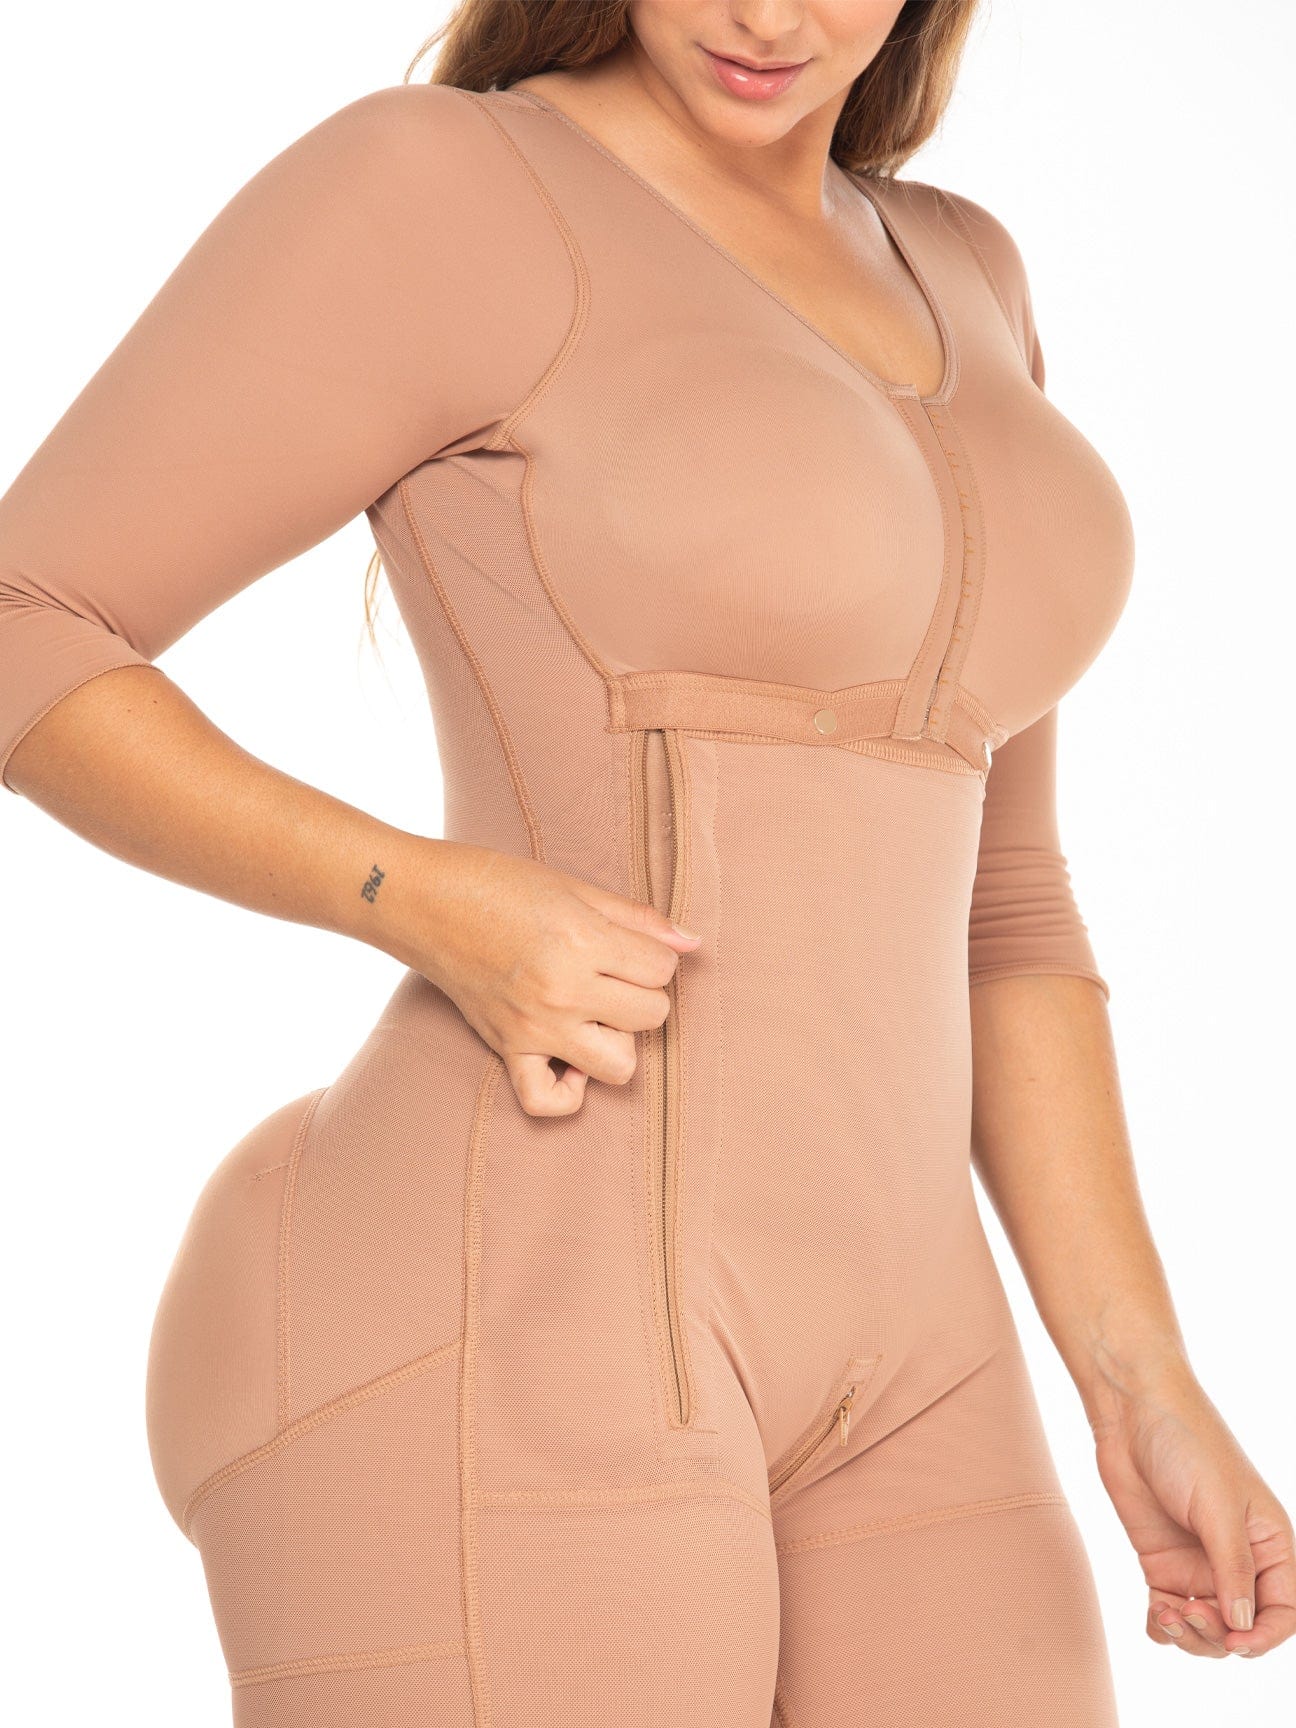 Side view of the full body faja with zipper functionality.